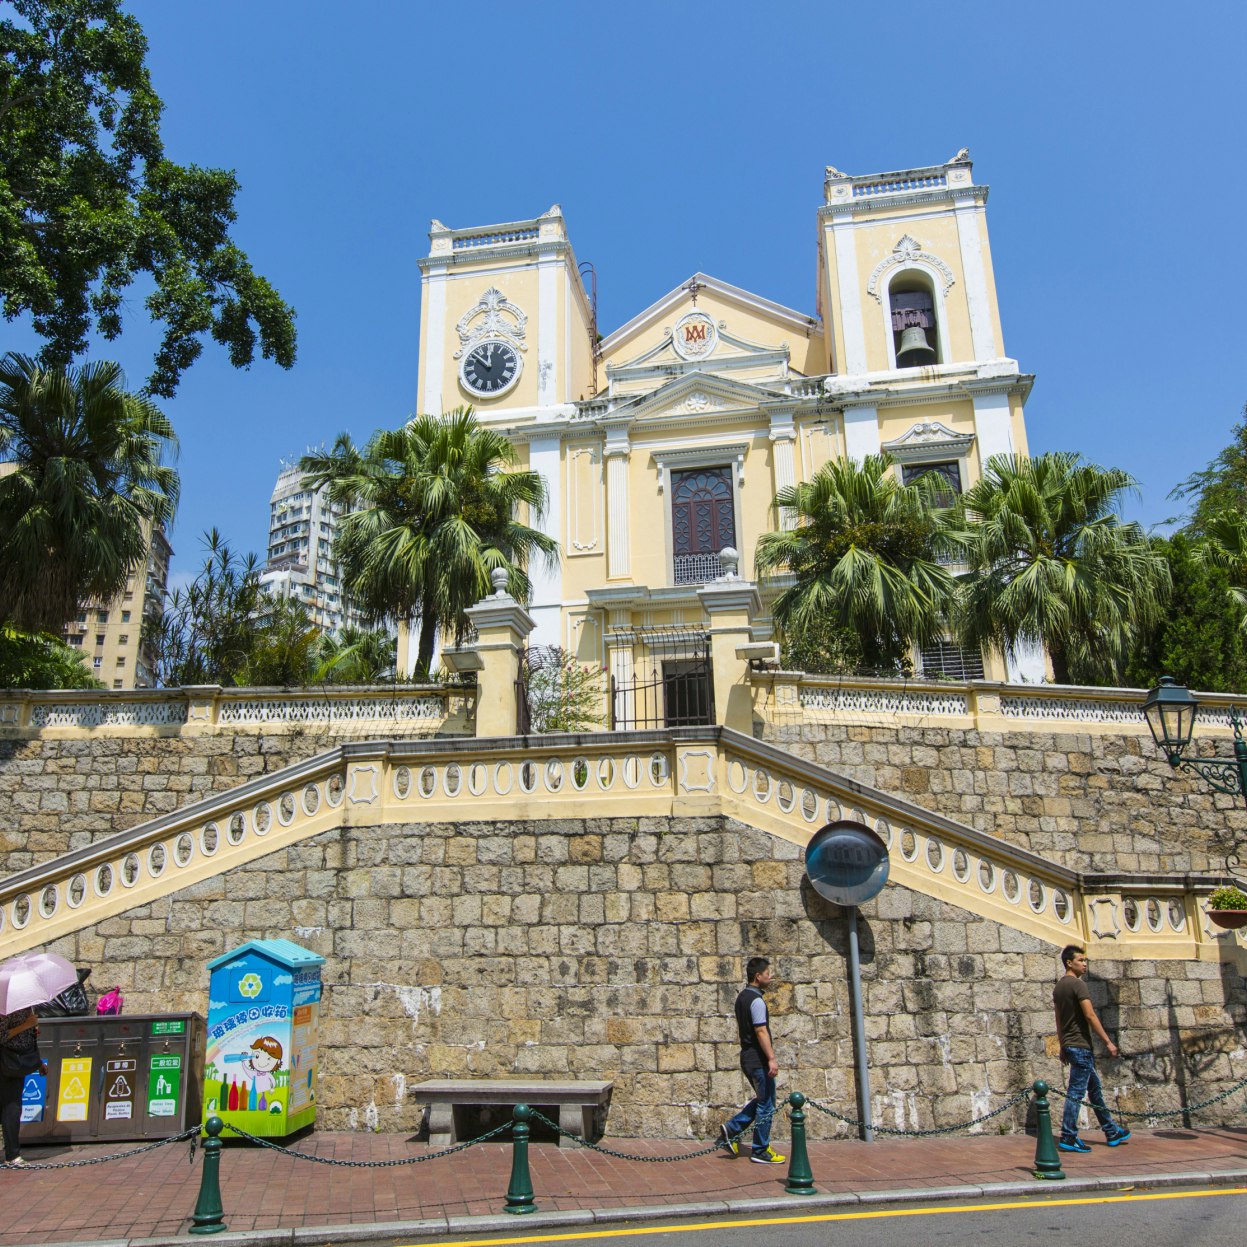 St Lawrences Cathedral in central Macau